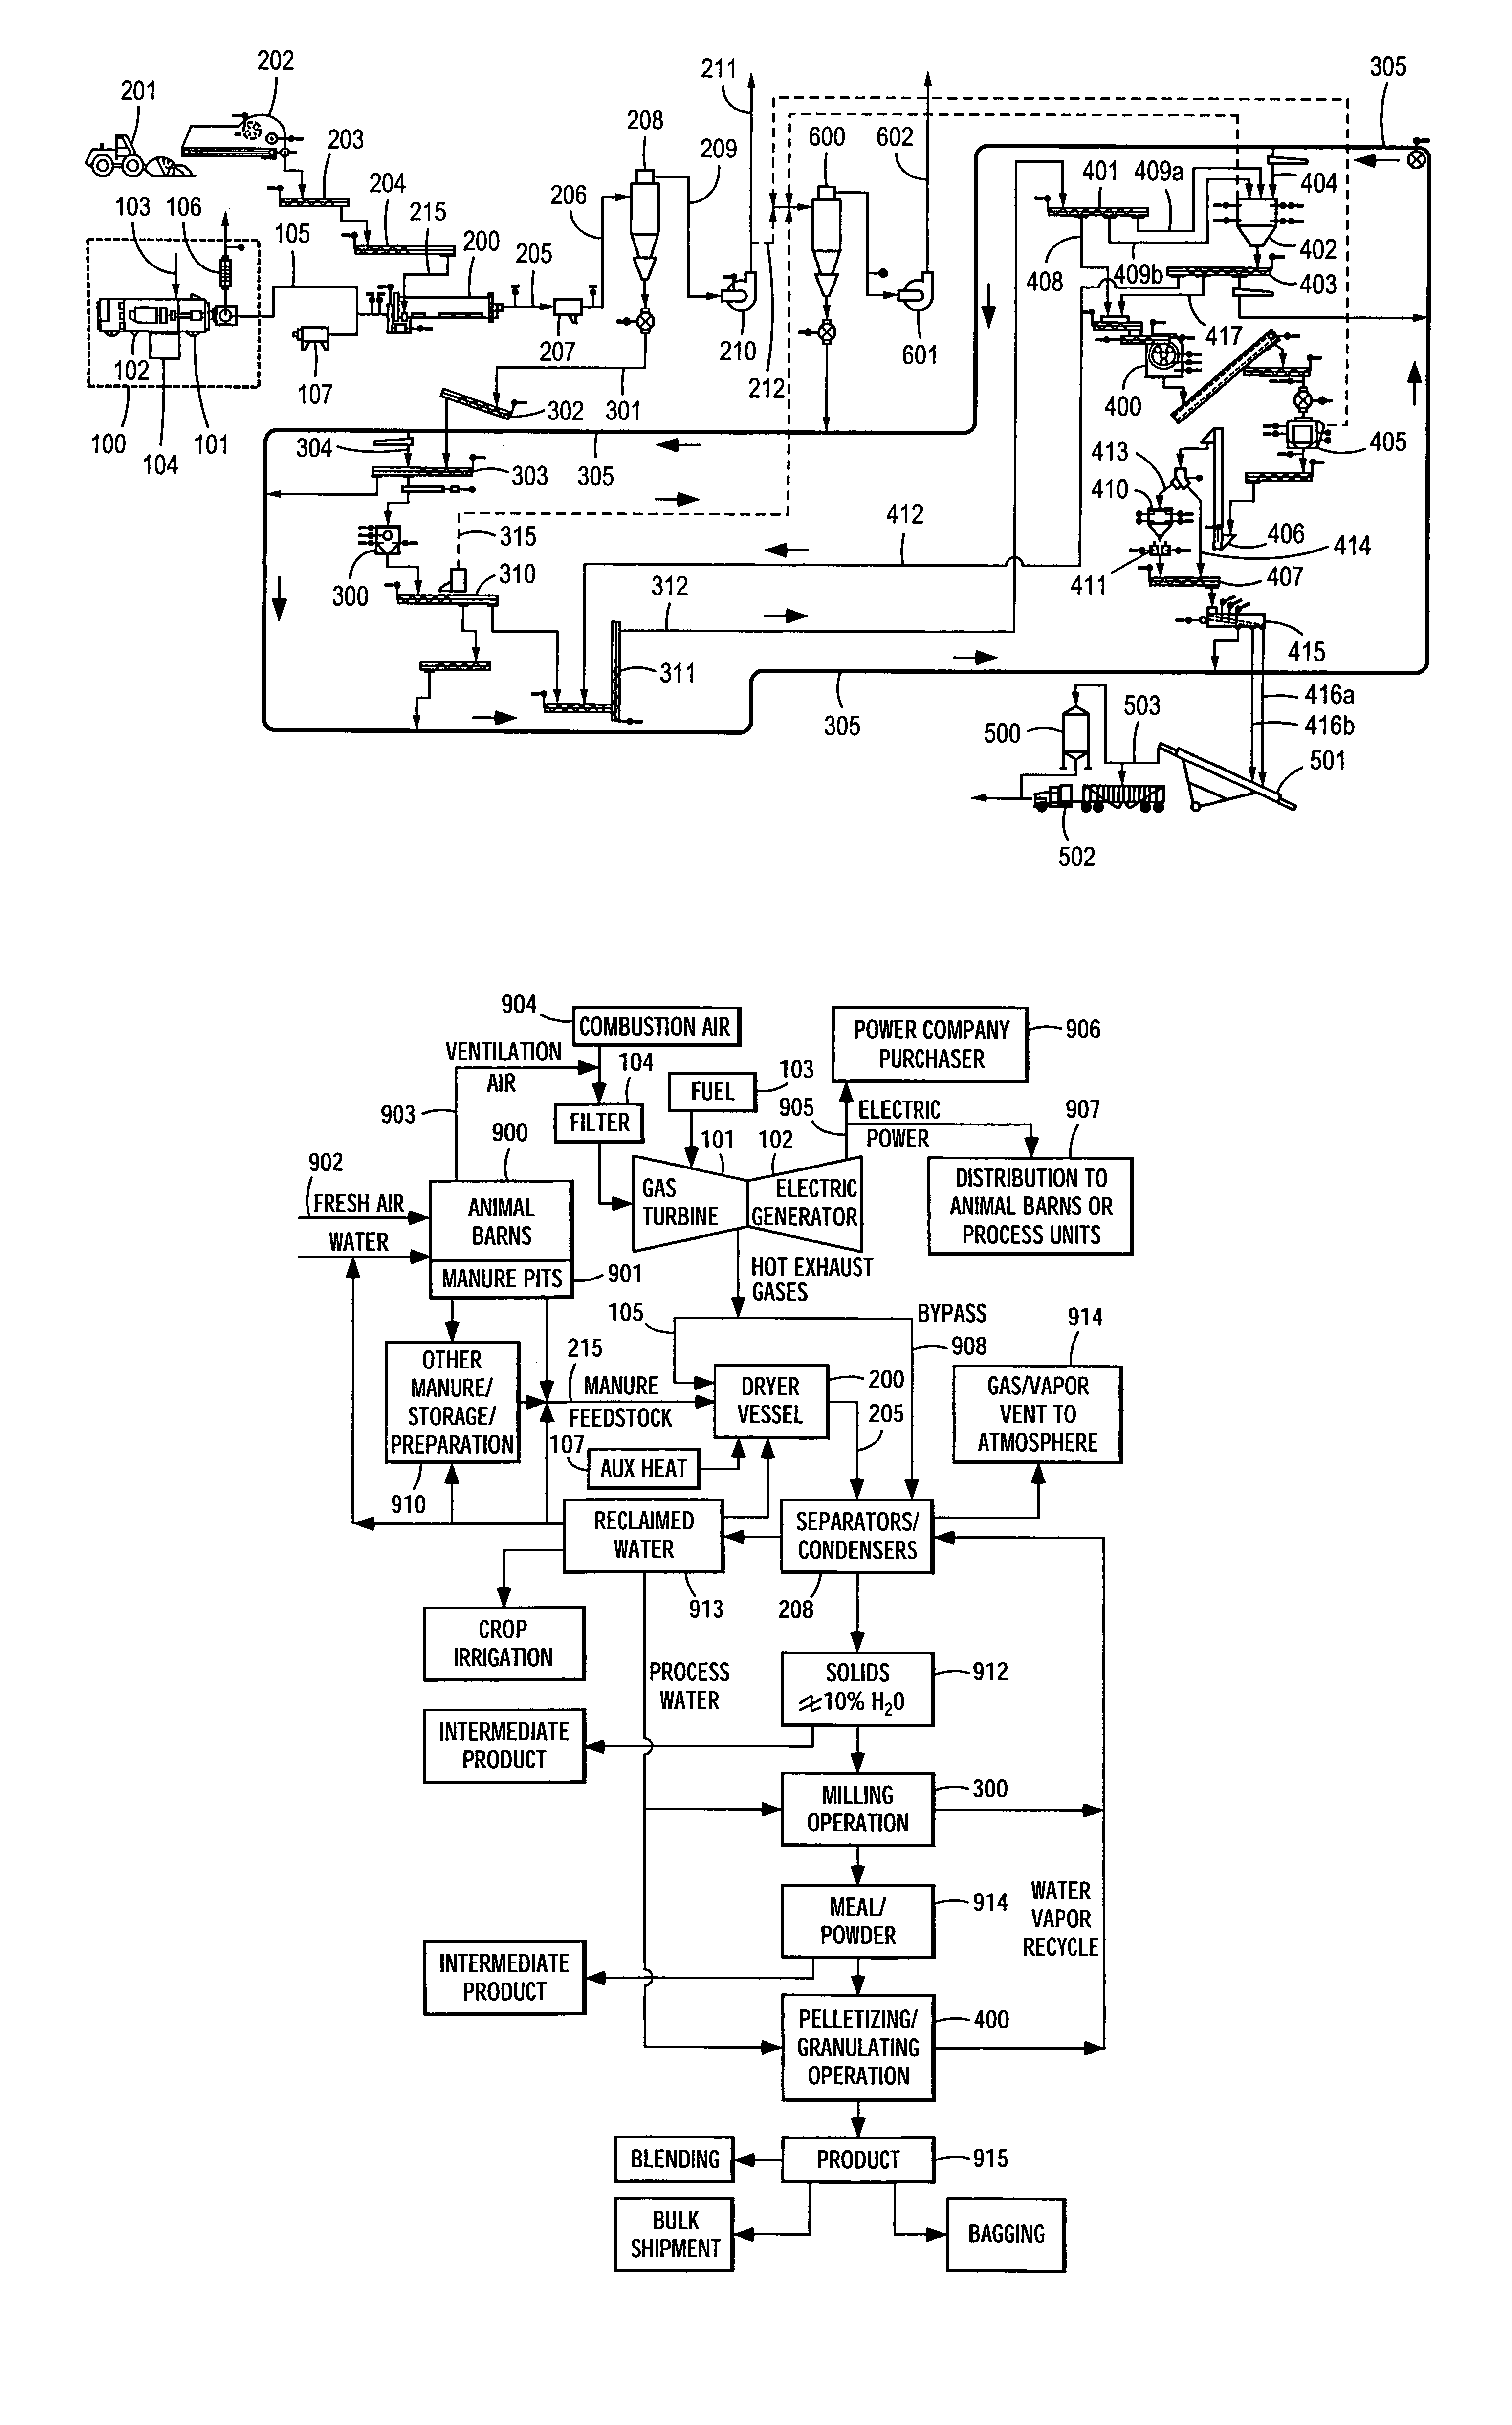 Process and apparatus for manufacture of fertilizer products from manure and sewage